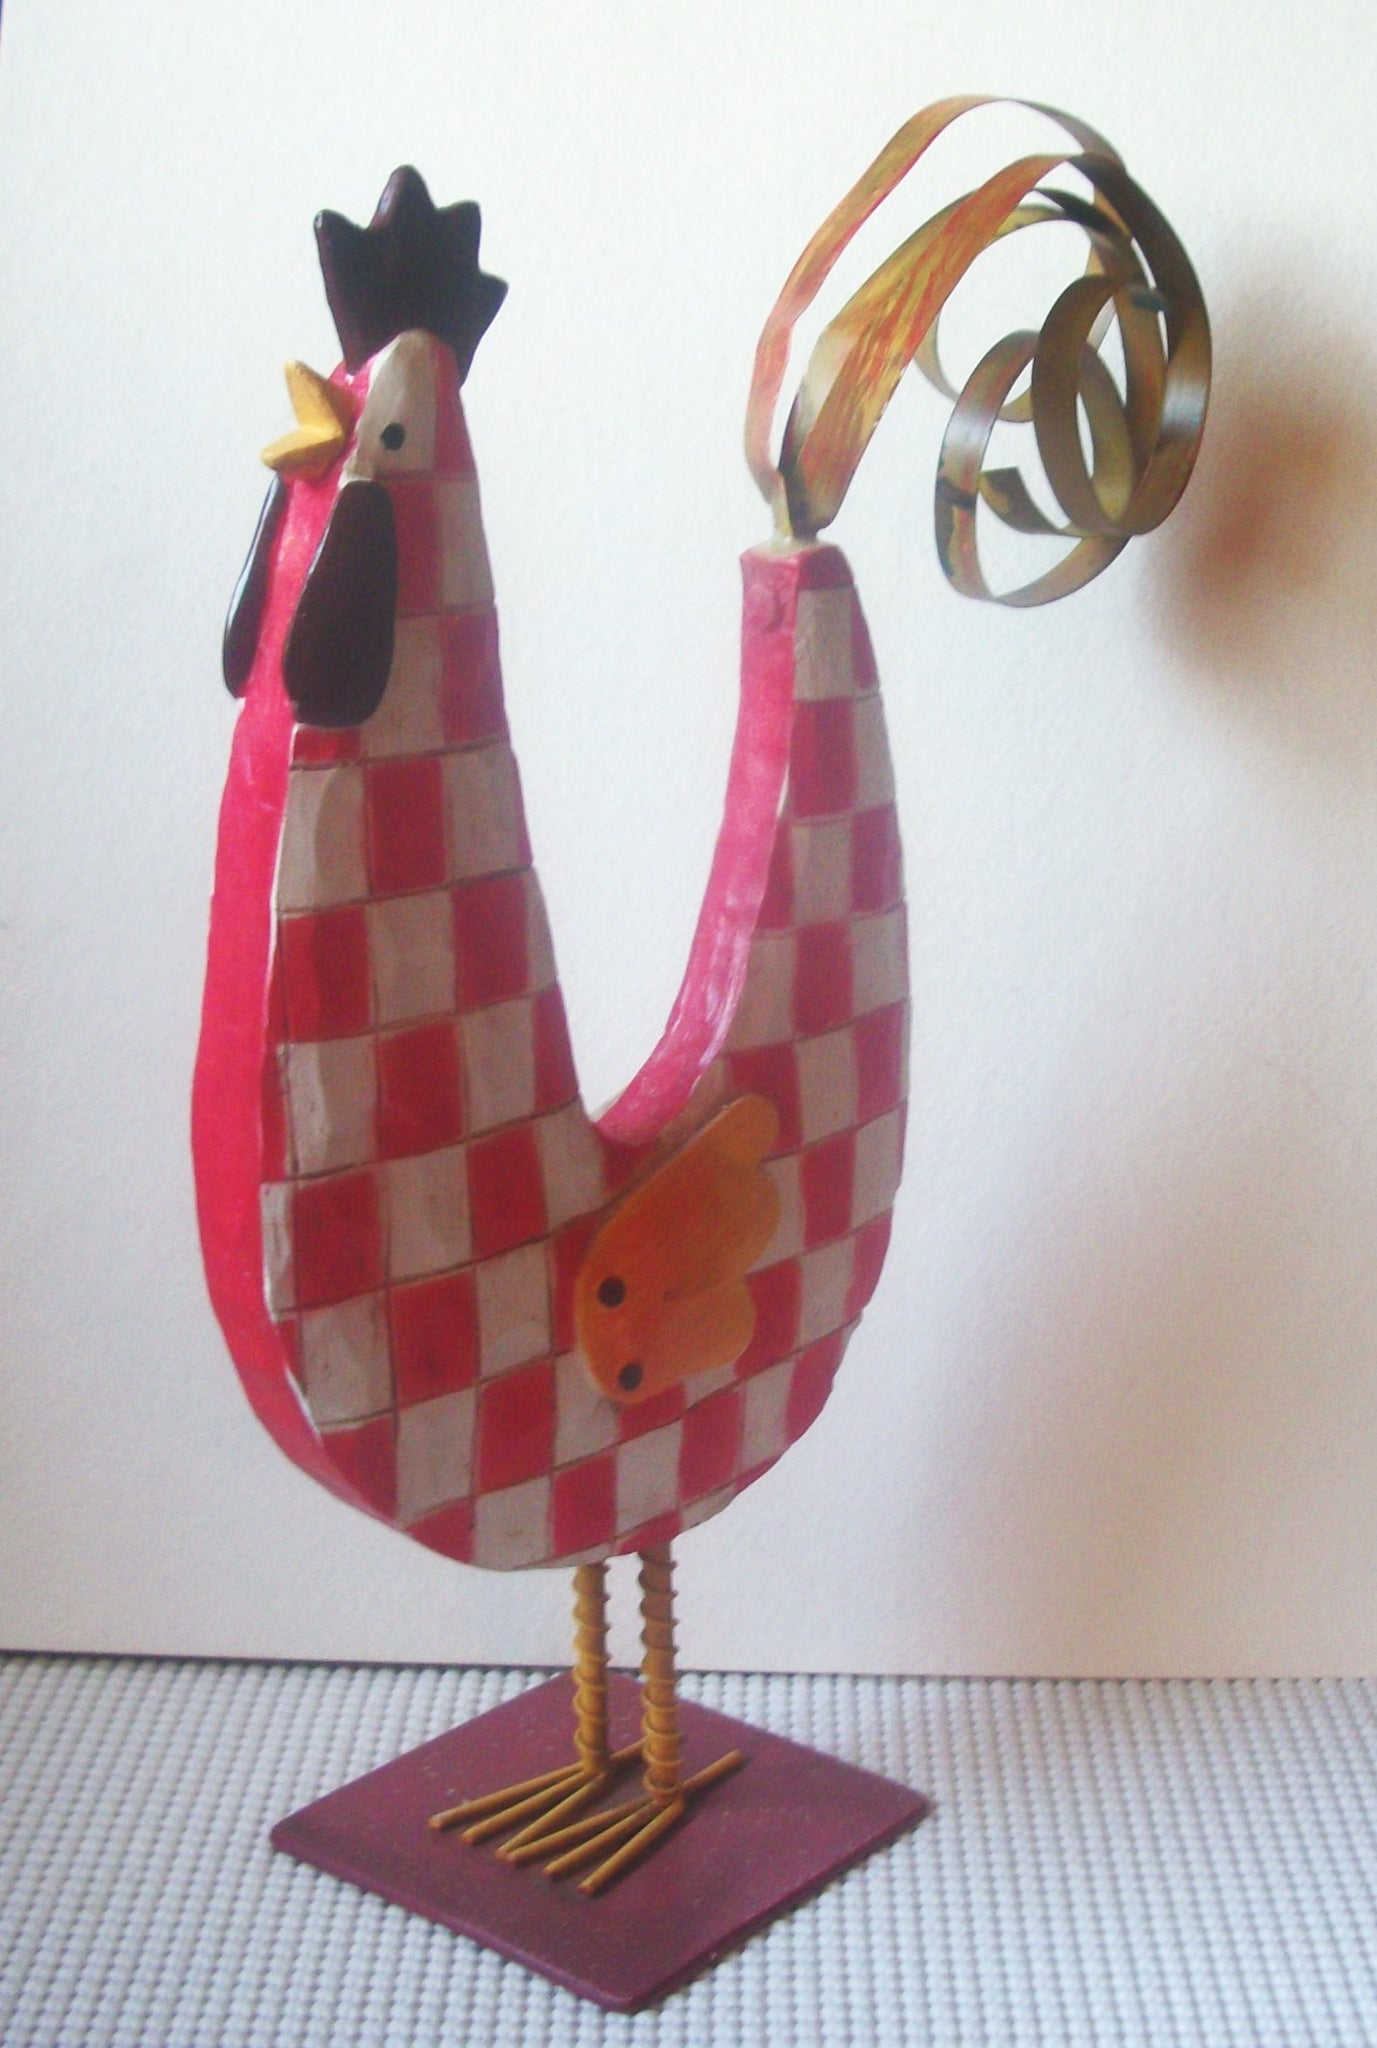 Rustic Vintage Rooster, Tall and Hand Crafted, From Welded Metal and Painted Bright Colorful Checkered Vintage